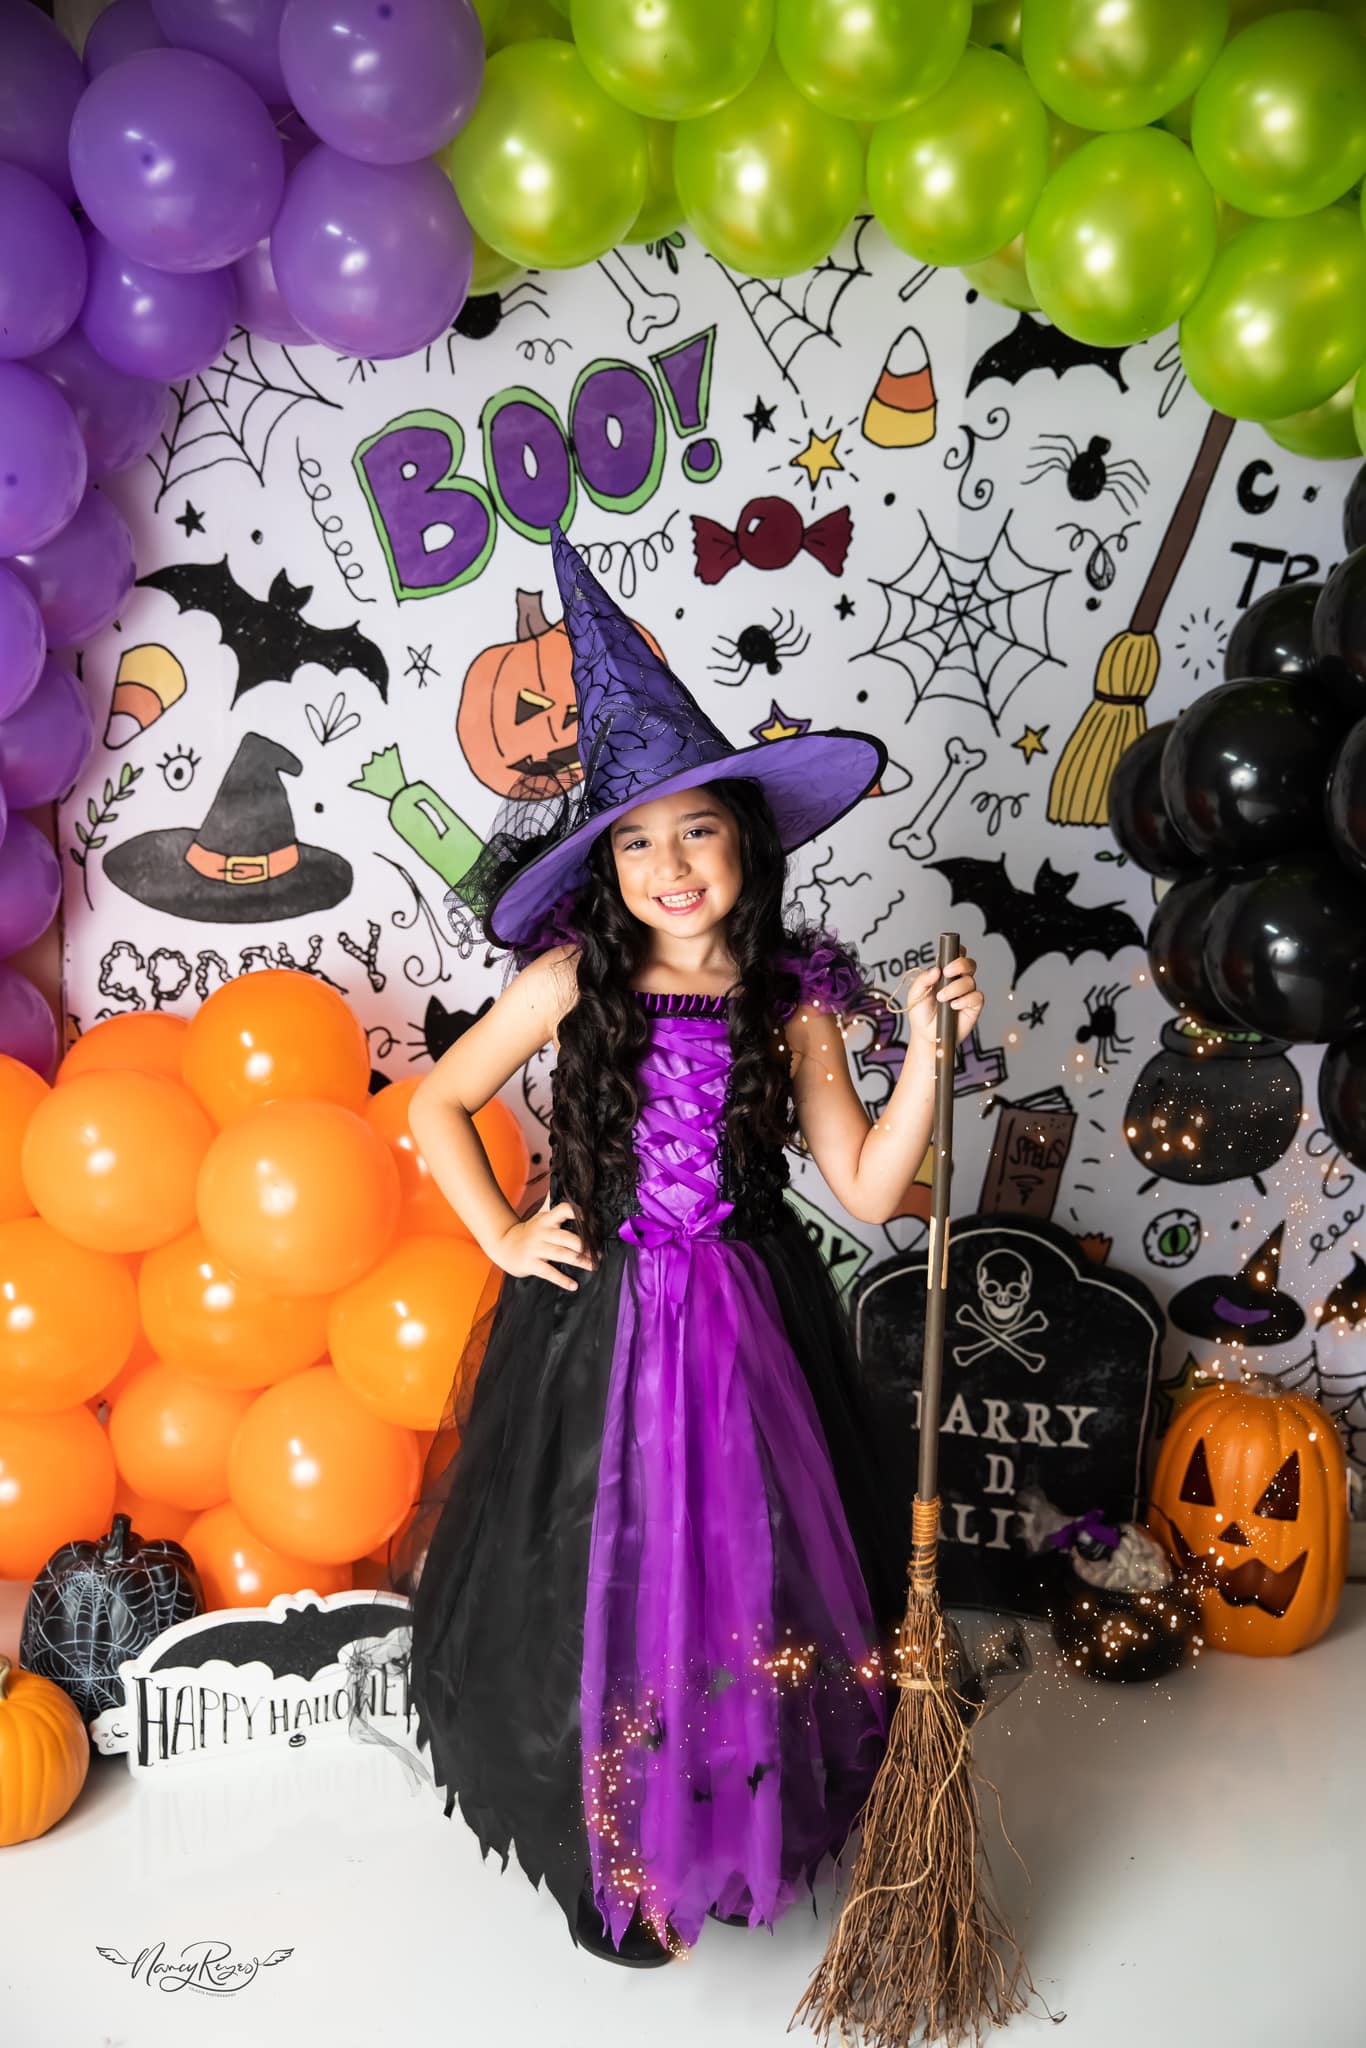 Kate Color Halloween Doodles Backdrop for Photography Designed By Mandy Ringe Photography